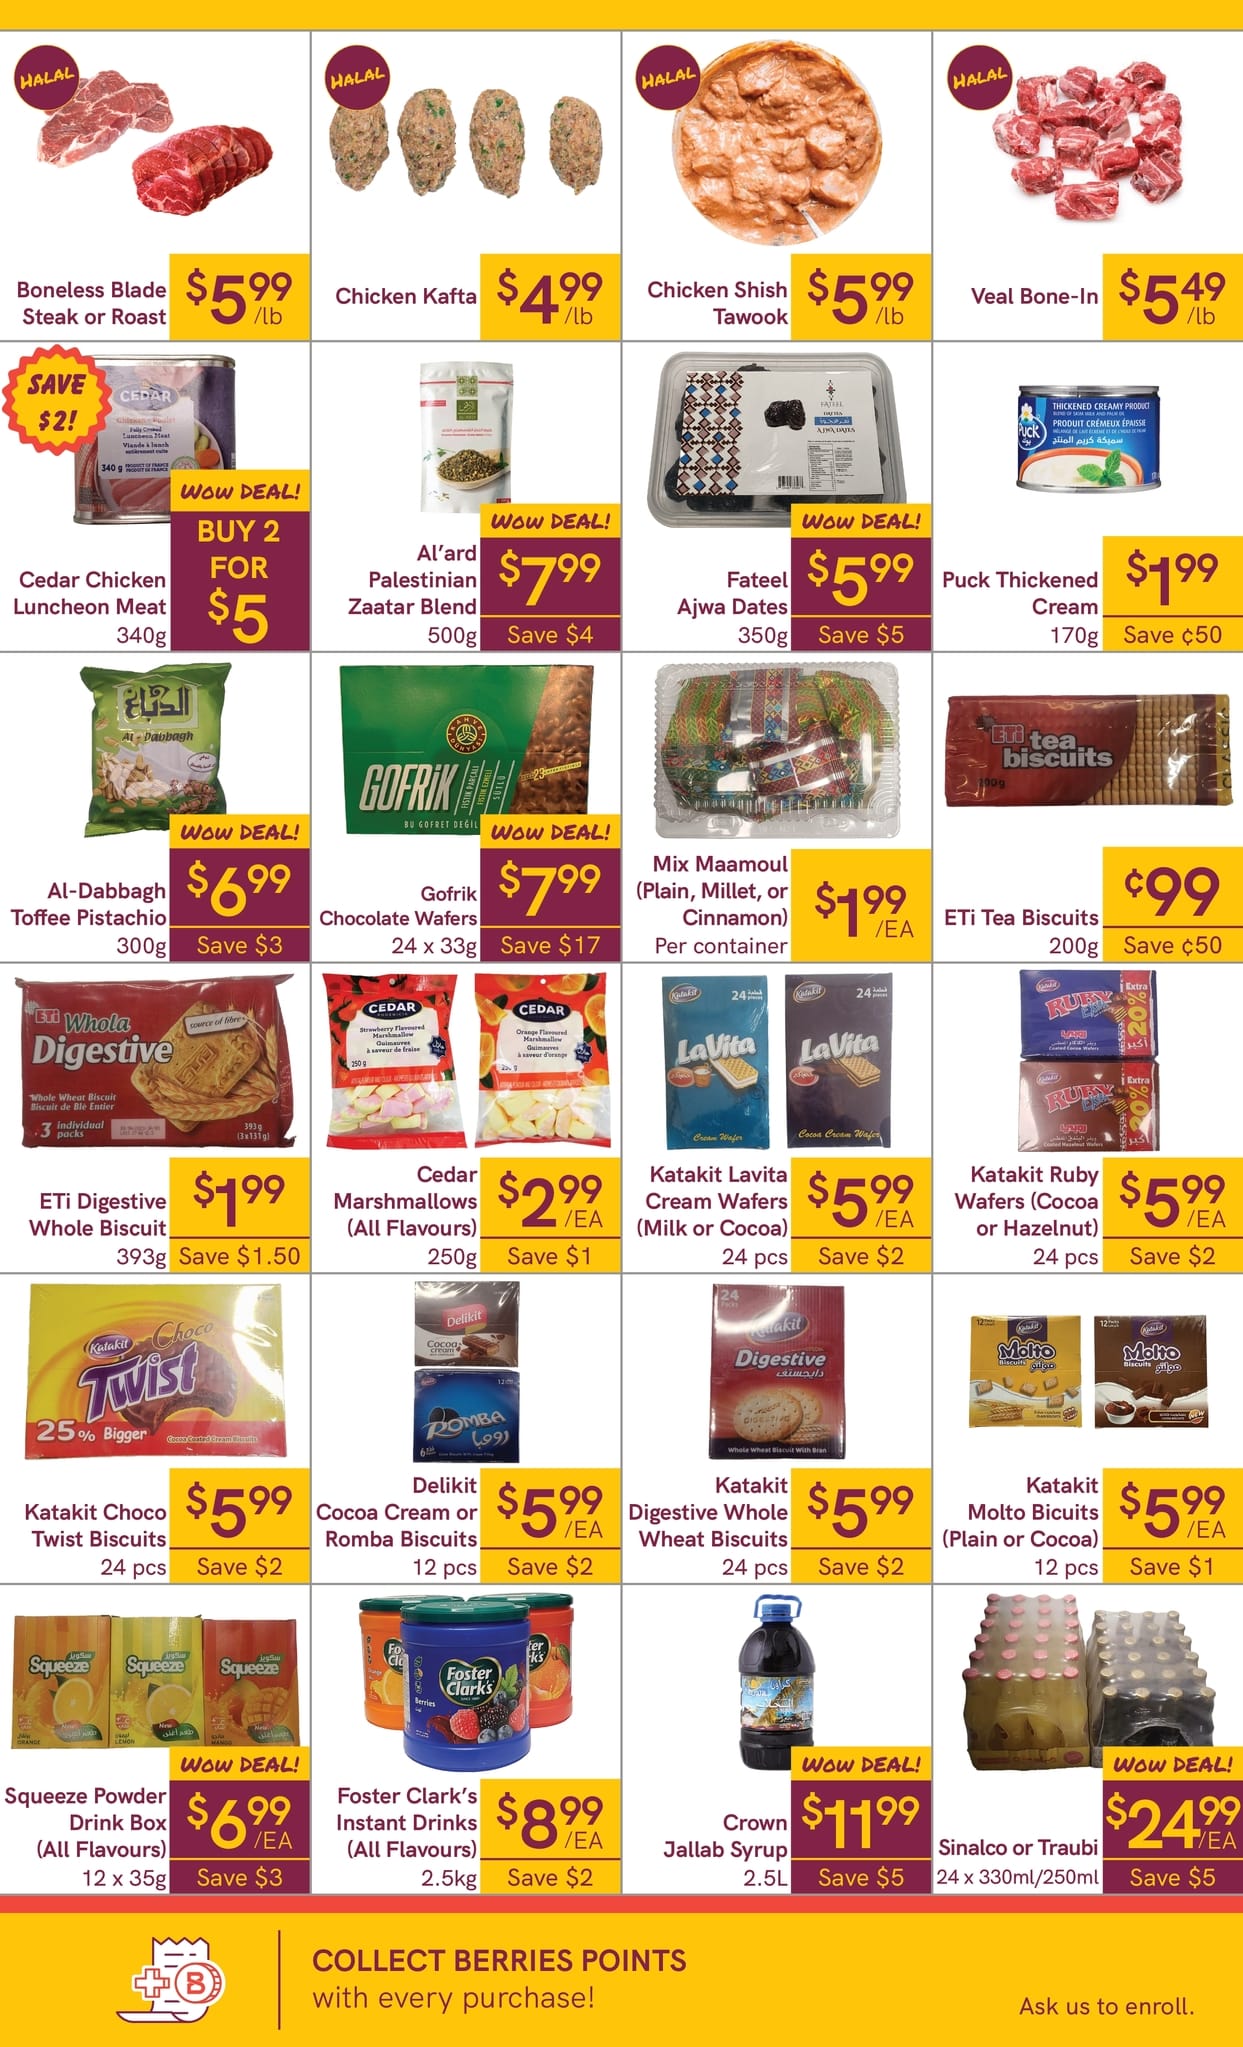 Berries Market - Weekly Flyer Specials - Page 2